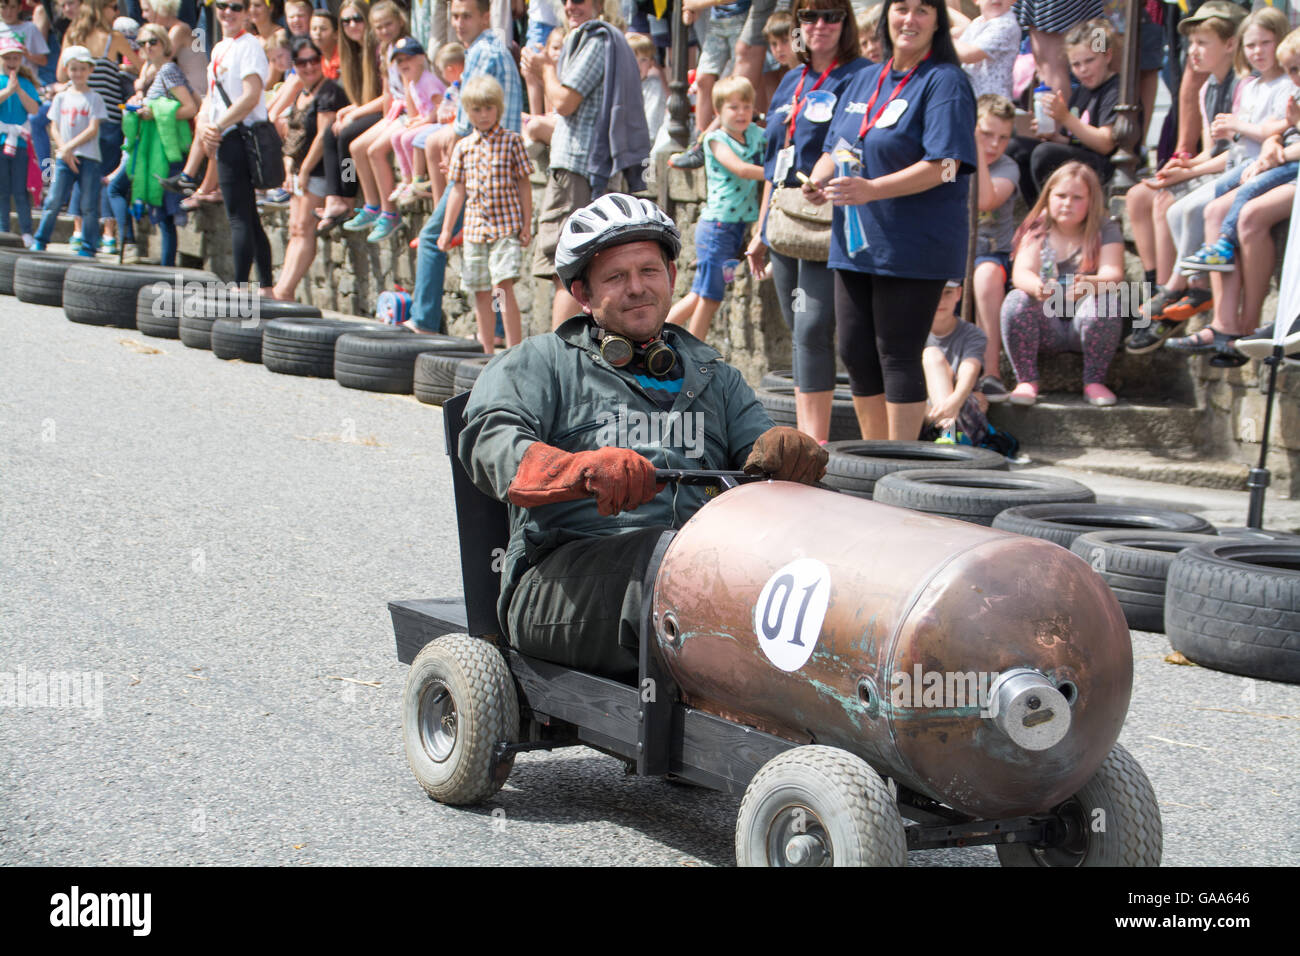 Penzance, Cornwall, UK. 5th August 2016. Steampunk soapbox derby at Penzance, starts a day of festivities culminating in the transformation of the giant "Man Engine" later on in the day. Credit:  Simon Maycock/Alamy Live News Stock Photo